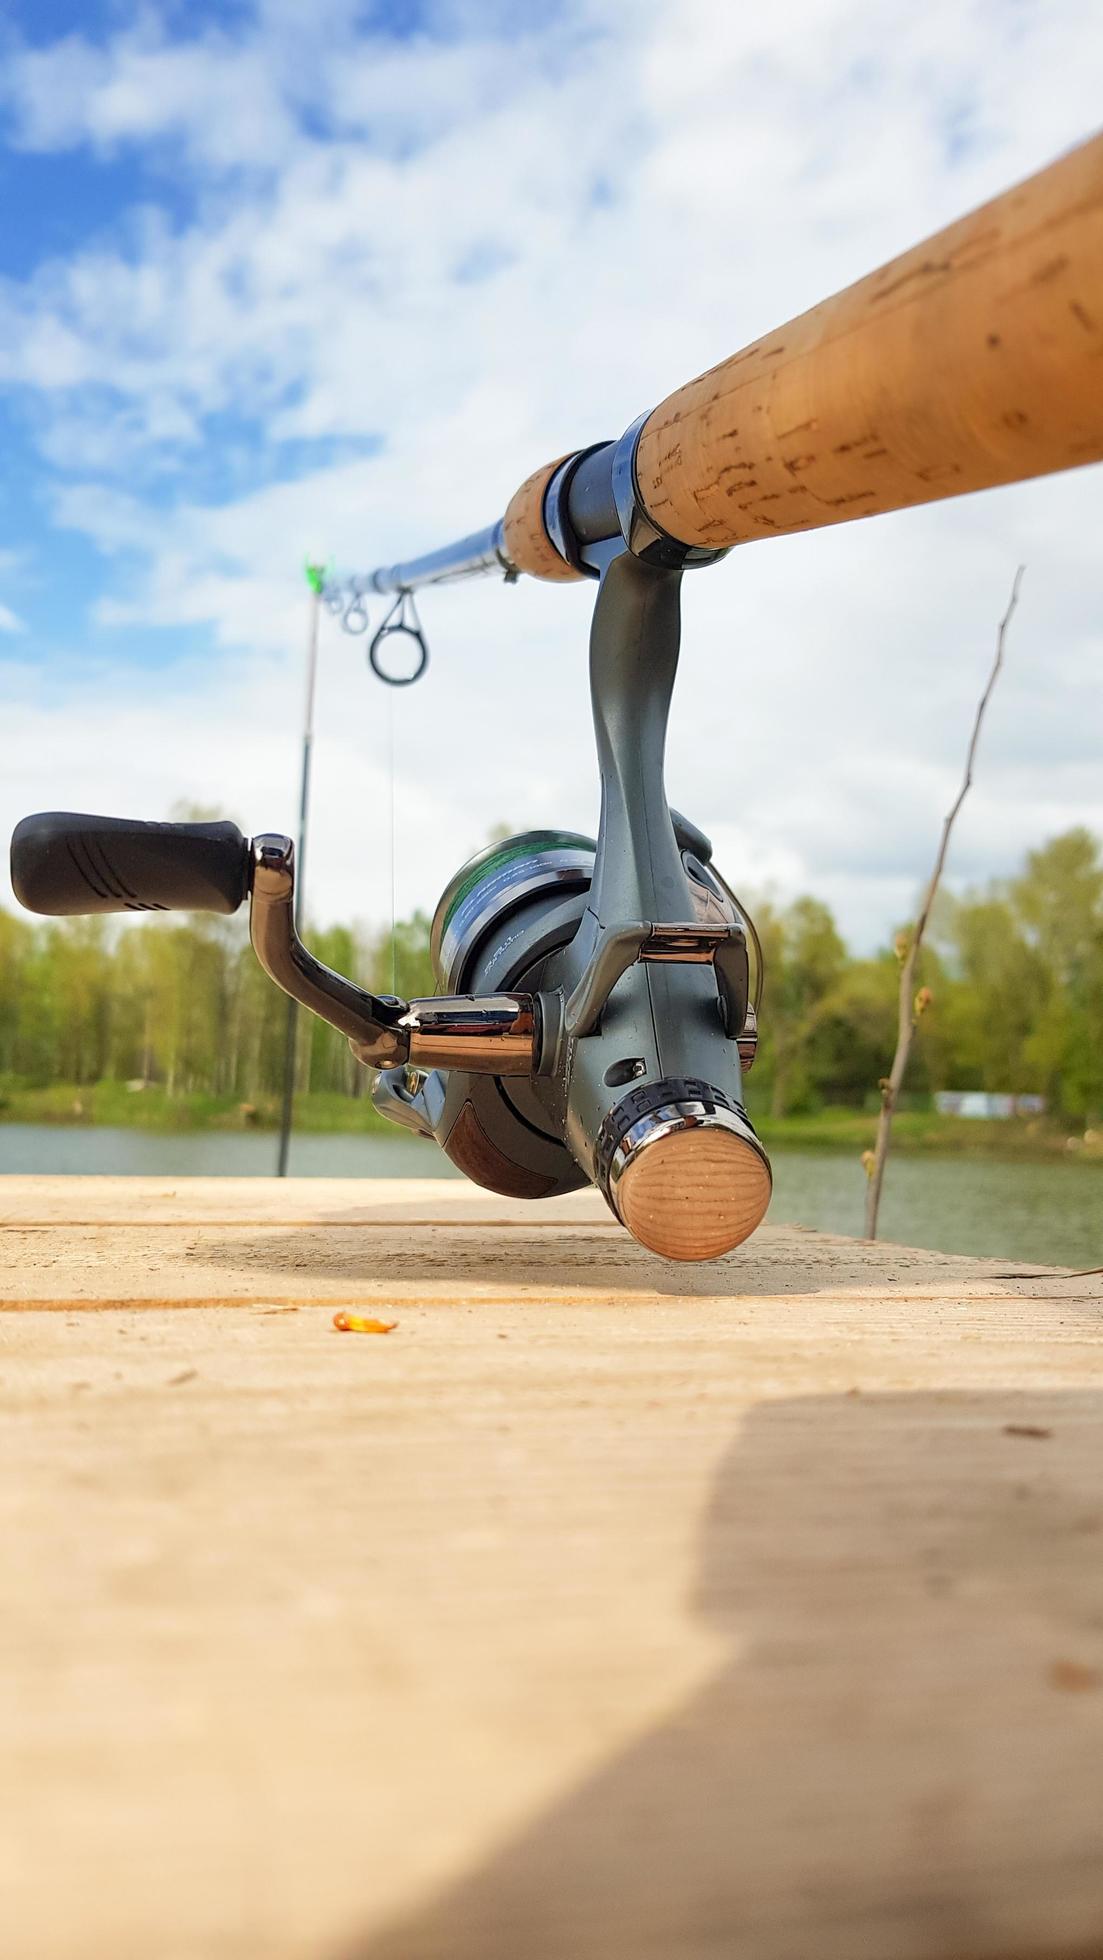 https://static.vecteezy.com/system/resources/previews/004/538/240/large_2x/carp-fishing-rod-isolated-on-the-lake-and-wooden-bridge-carp-feeder-spinning-reel-close-up-fishing-for-carp-on-the-lake-fisherman-s-equipment-verticalgraphy-free-photo.jpg